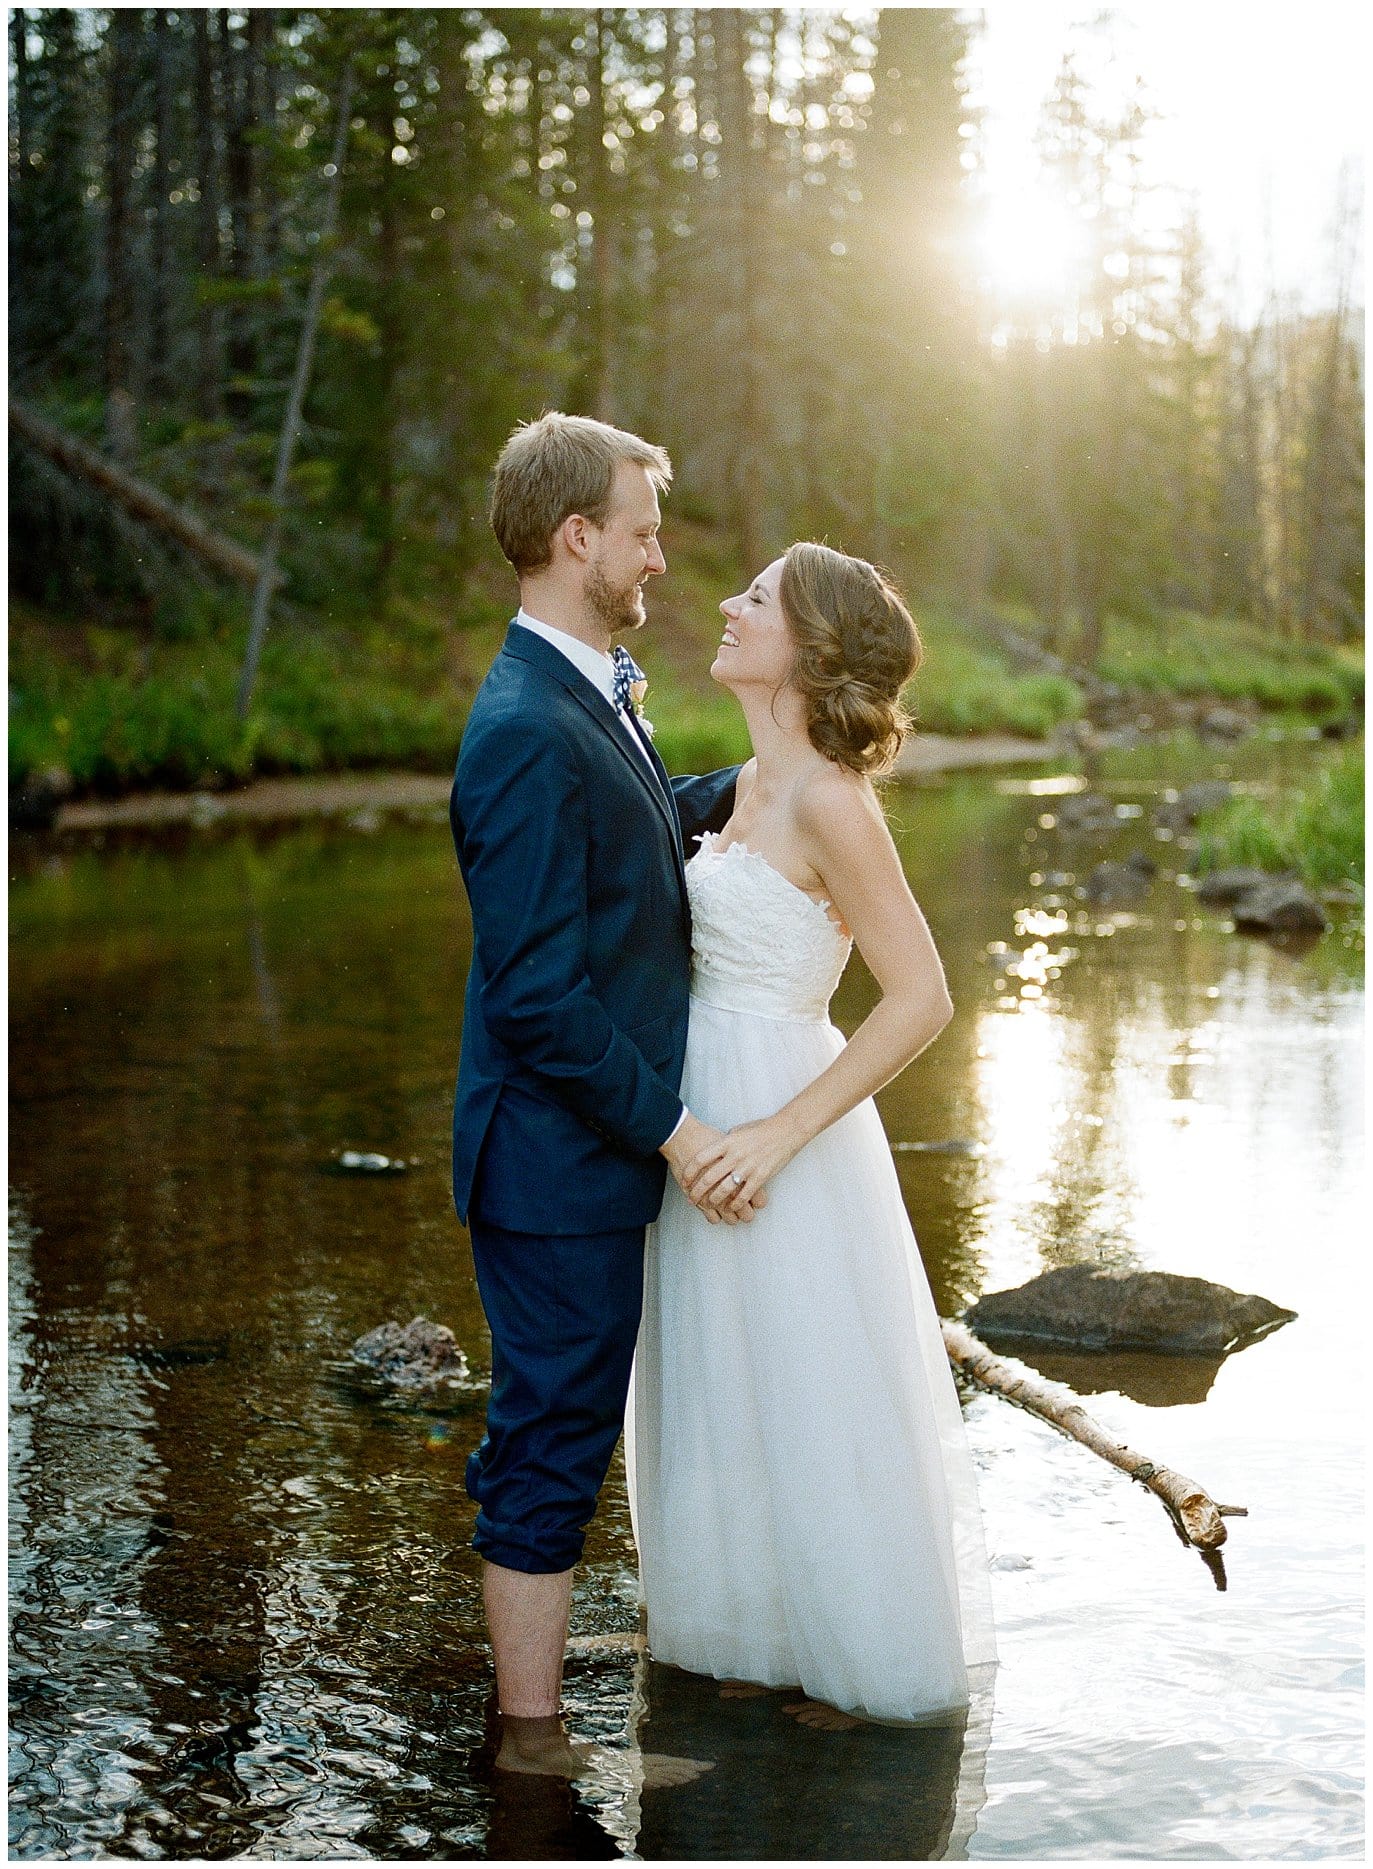 bride and groom wading in river on wedding day at Piney River Ranch intimate wedding by Beaver Creek wedding photographer Jennie Crate Photographer